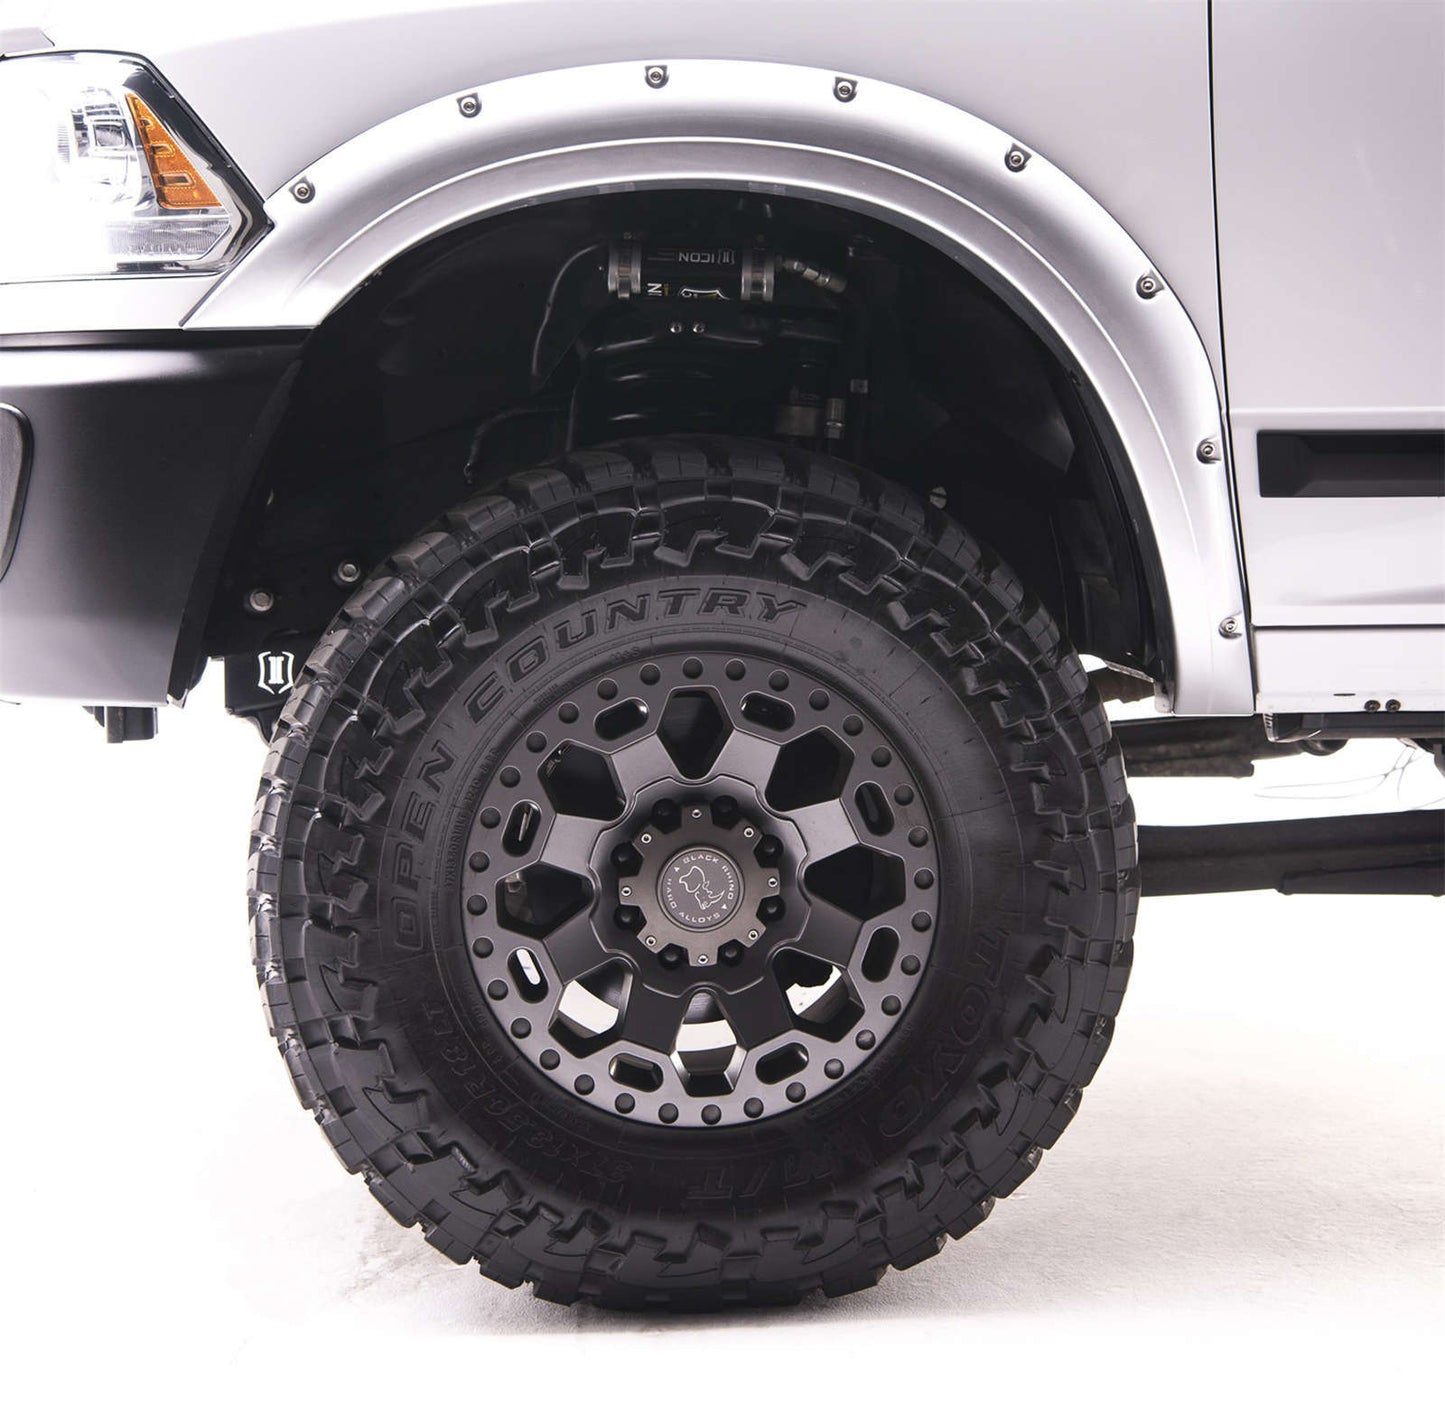 EGR - 792854-PS2 - USA Bright Silver Metallic Color Match Style Fender Flares